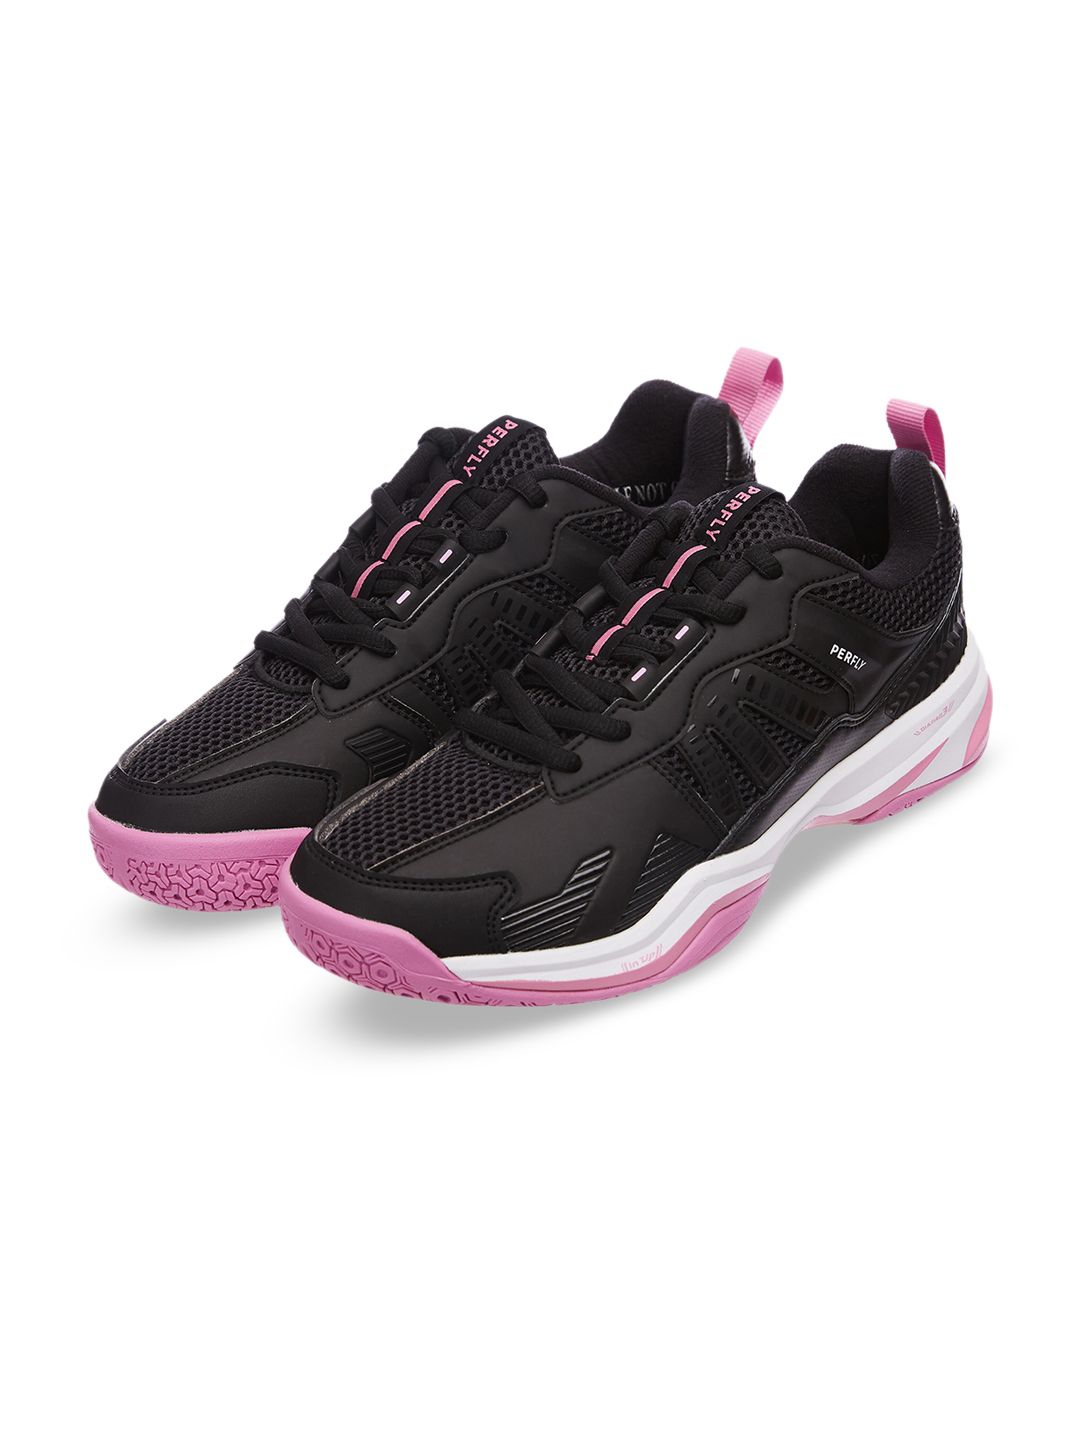 PERFLY By Decathlon Women Black Badminton Shoes Price in India